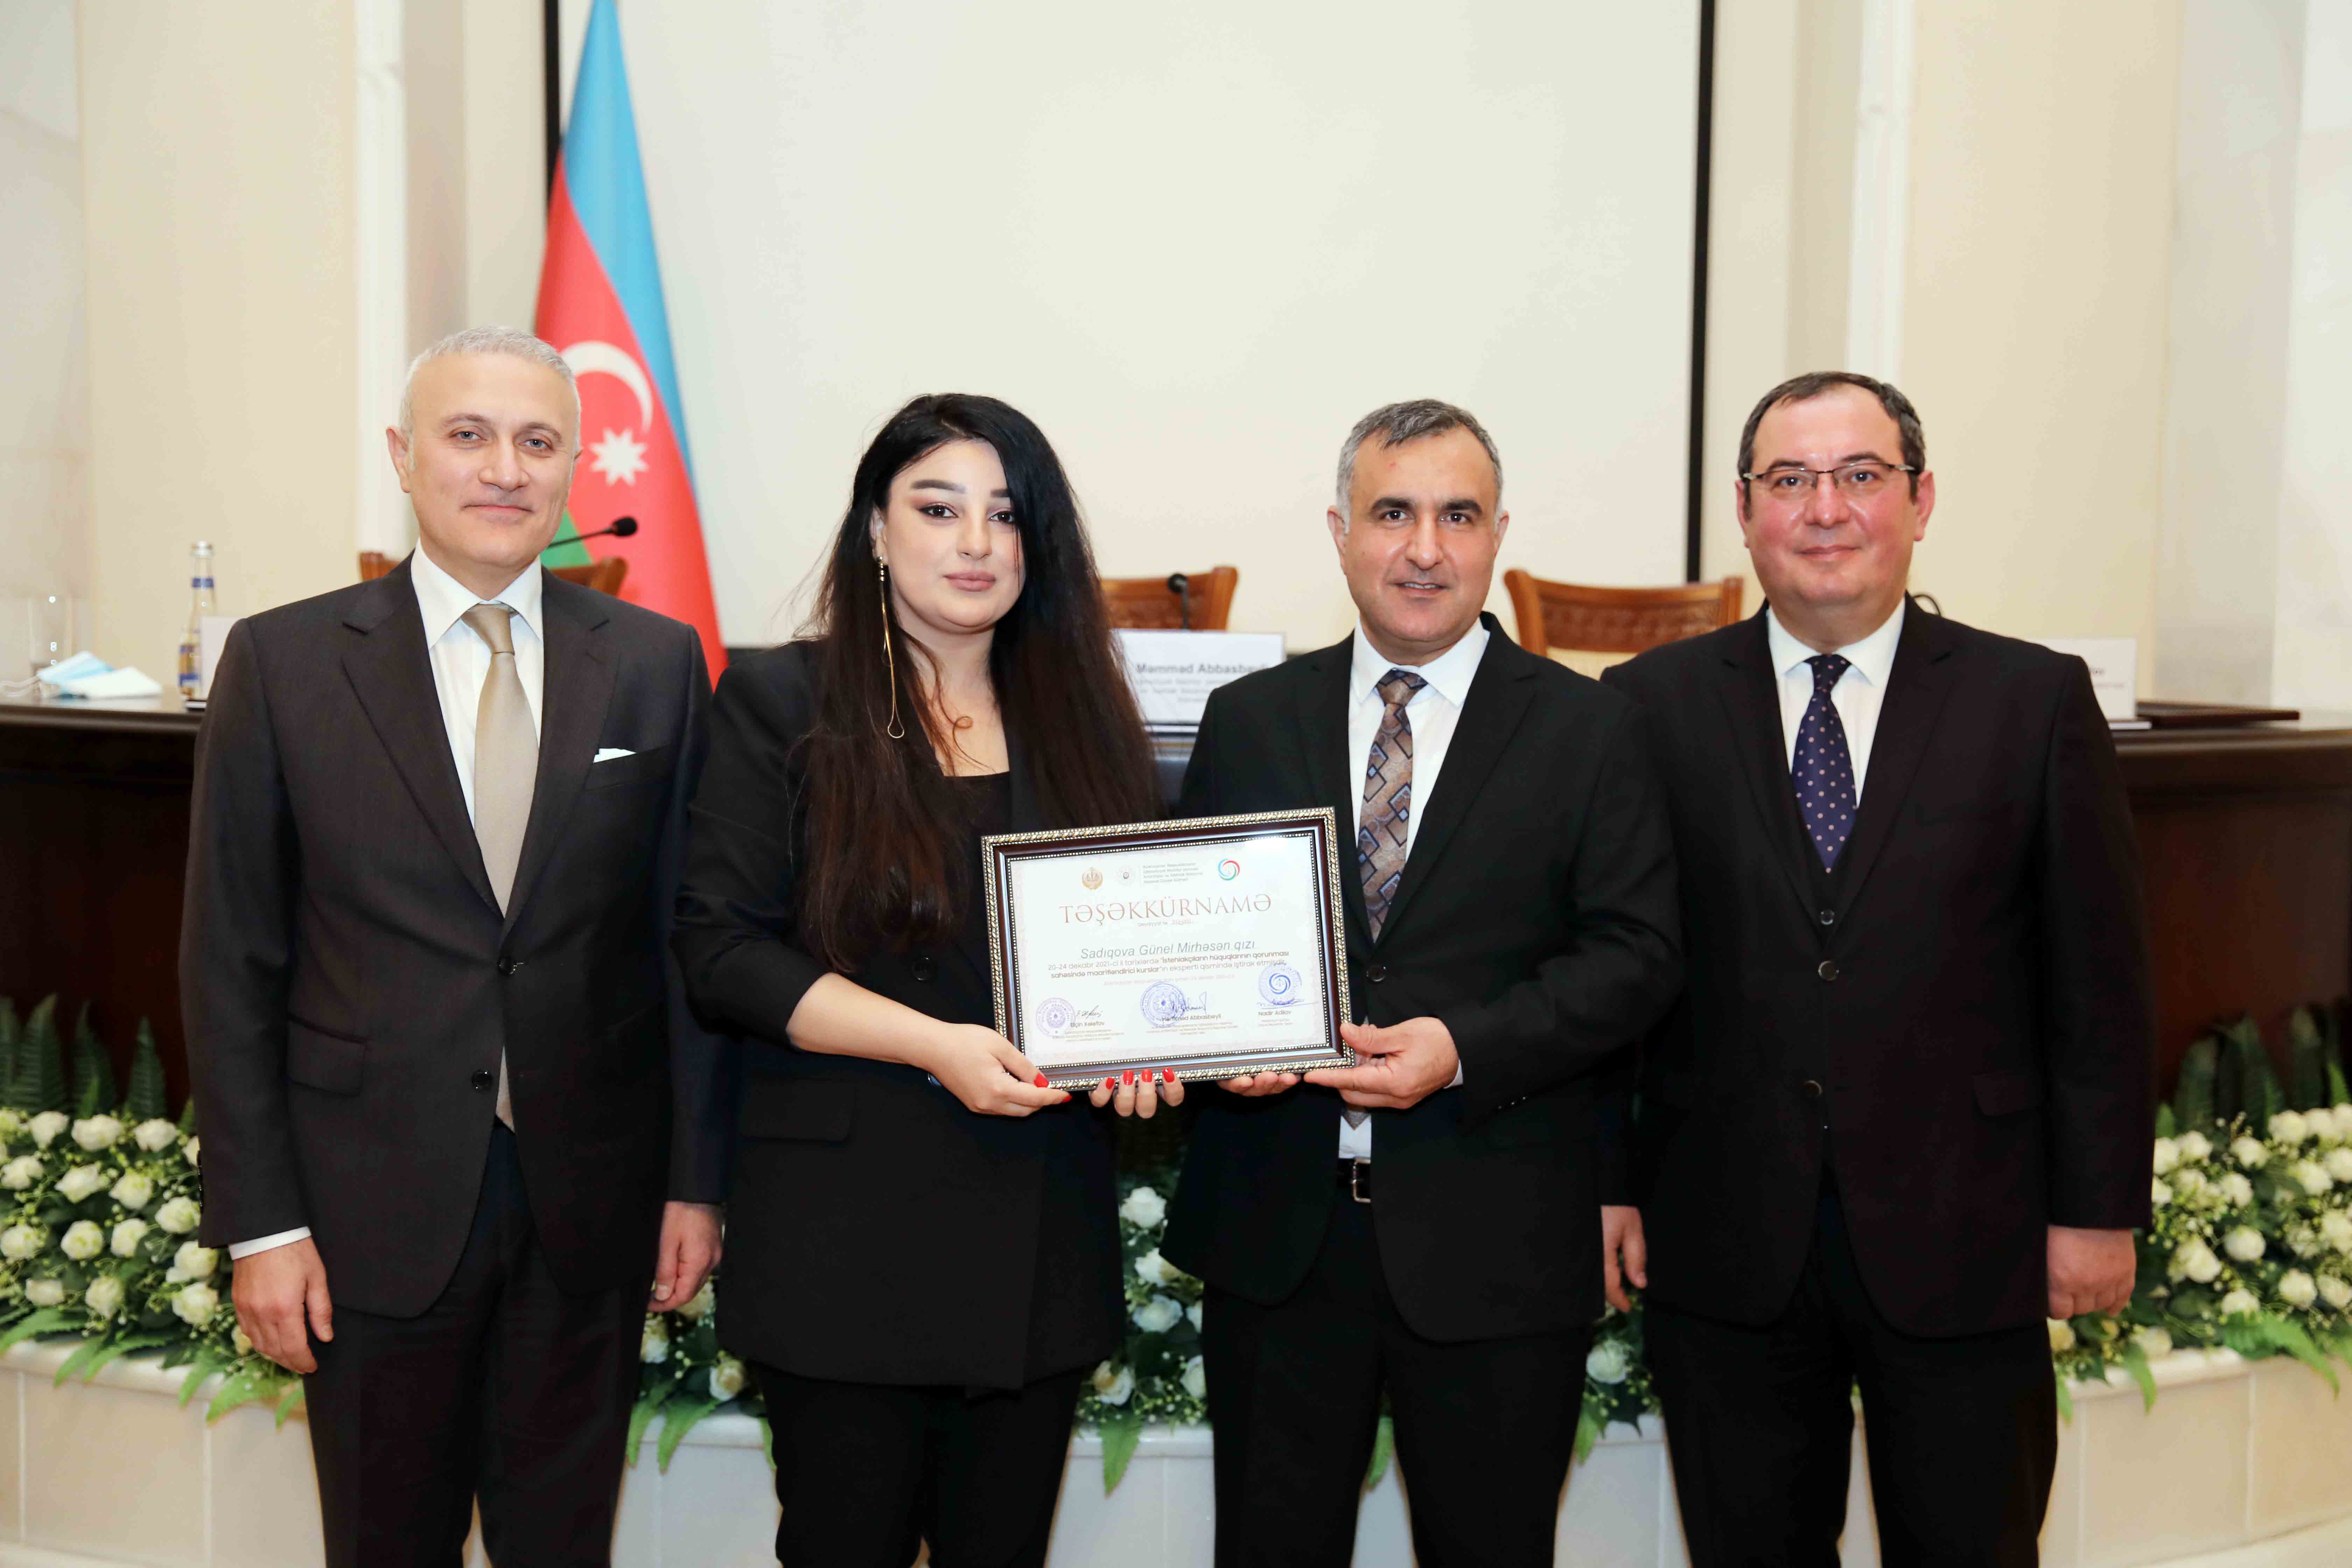 Certificates were presented to the mediators who participated in the training